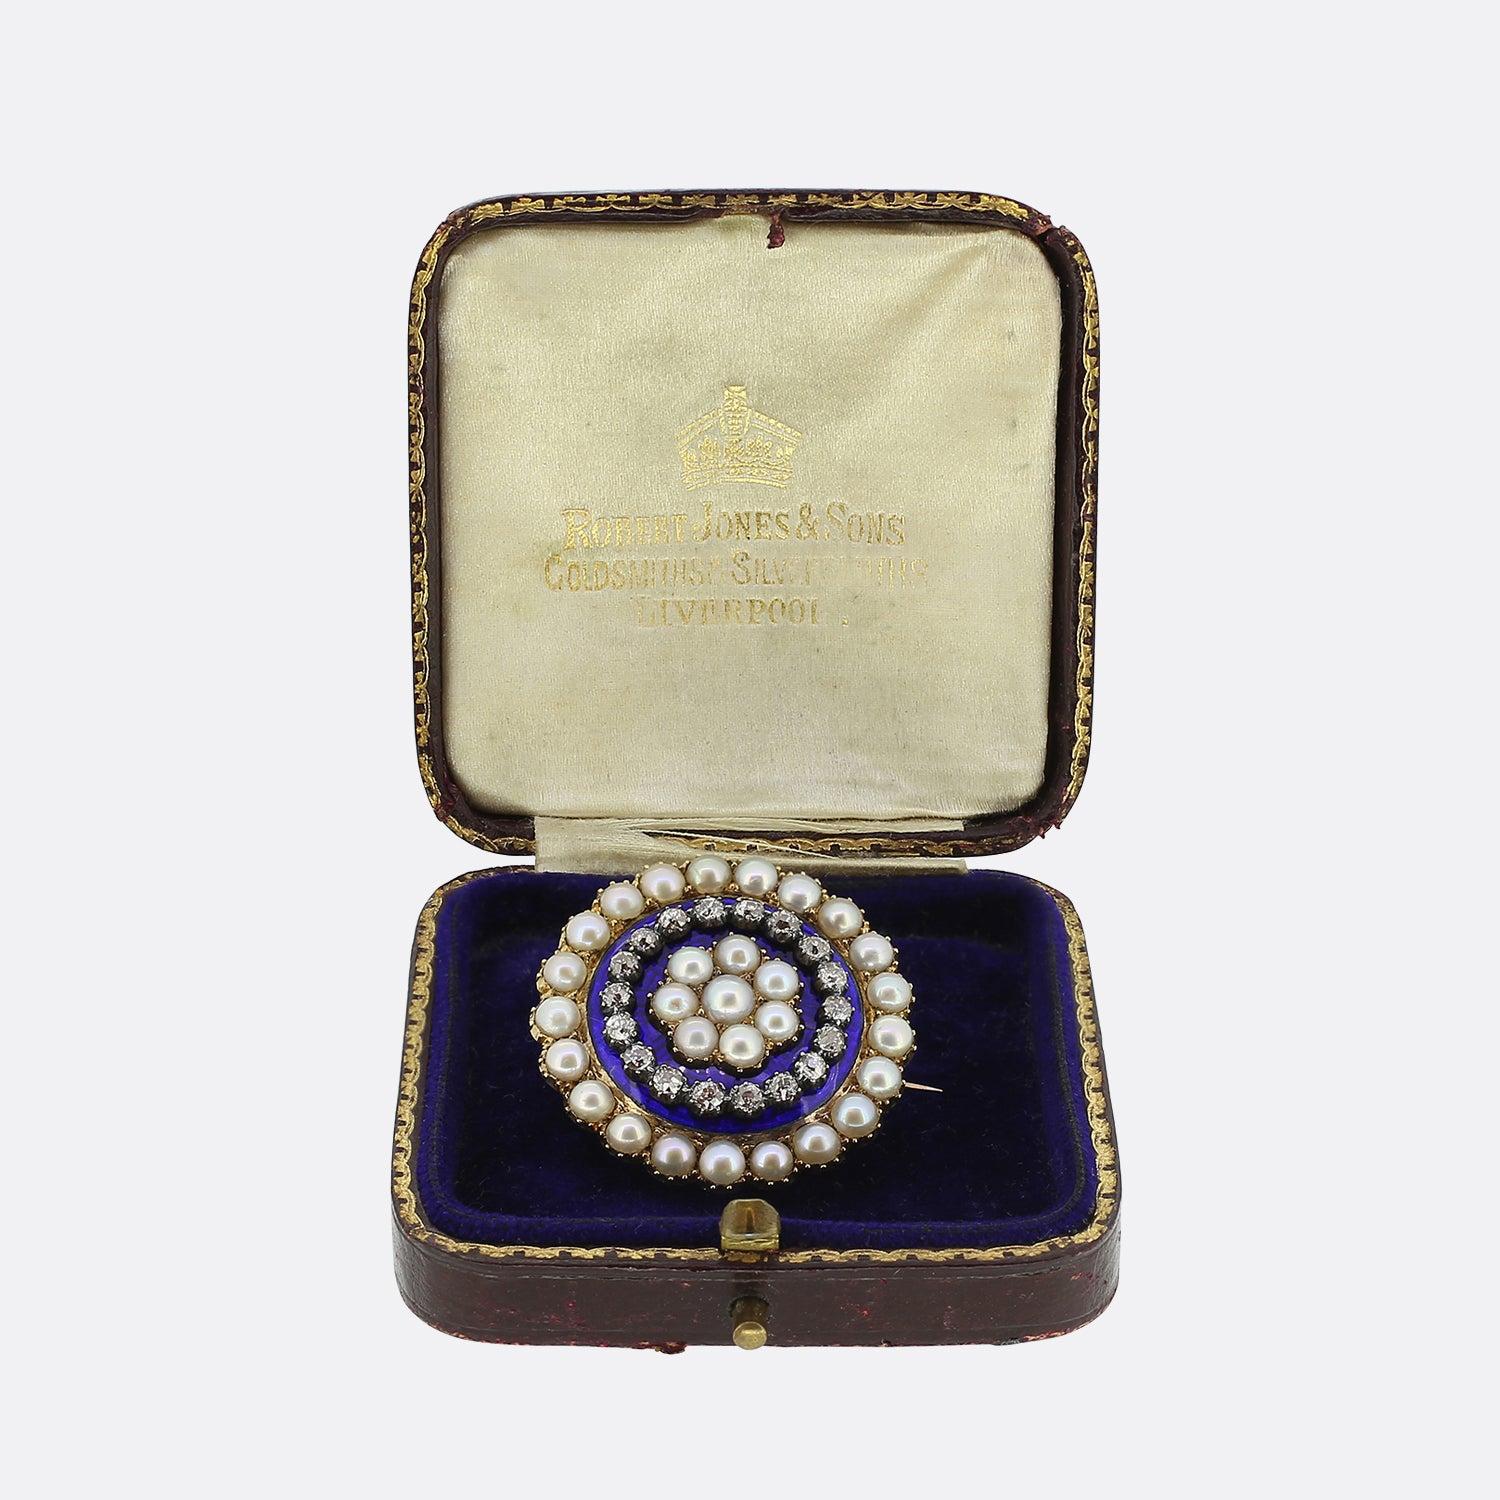 This is a Victorian 15ct gold pearl and diamond double heart brooch. The brooch features a rose cut diamond double heart motif crafted in silver within a blue and white enamel centre section. Surrounding the outside of the brooch are twenty eight